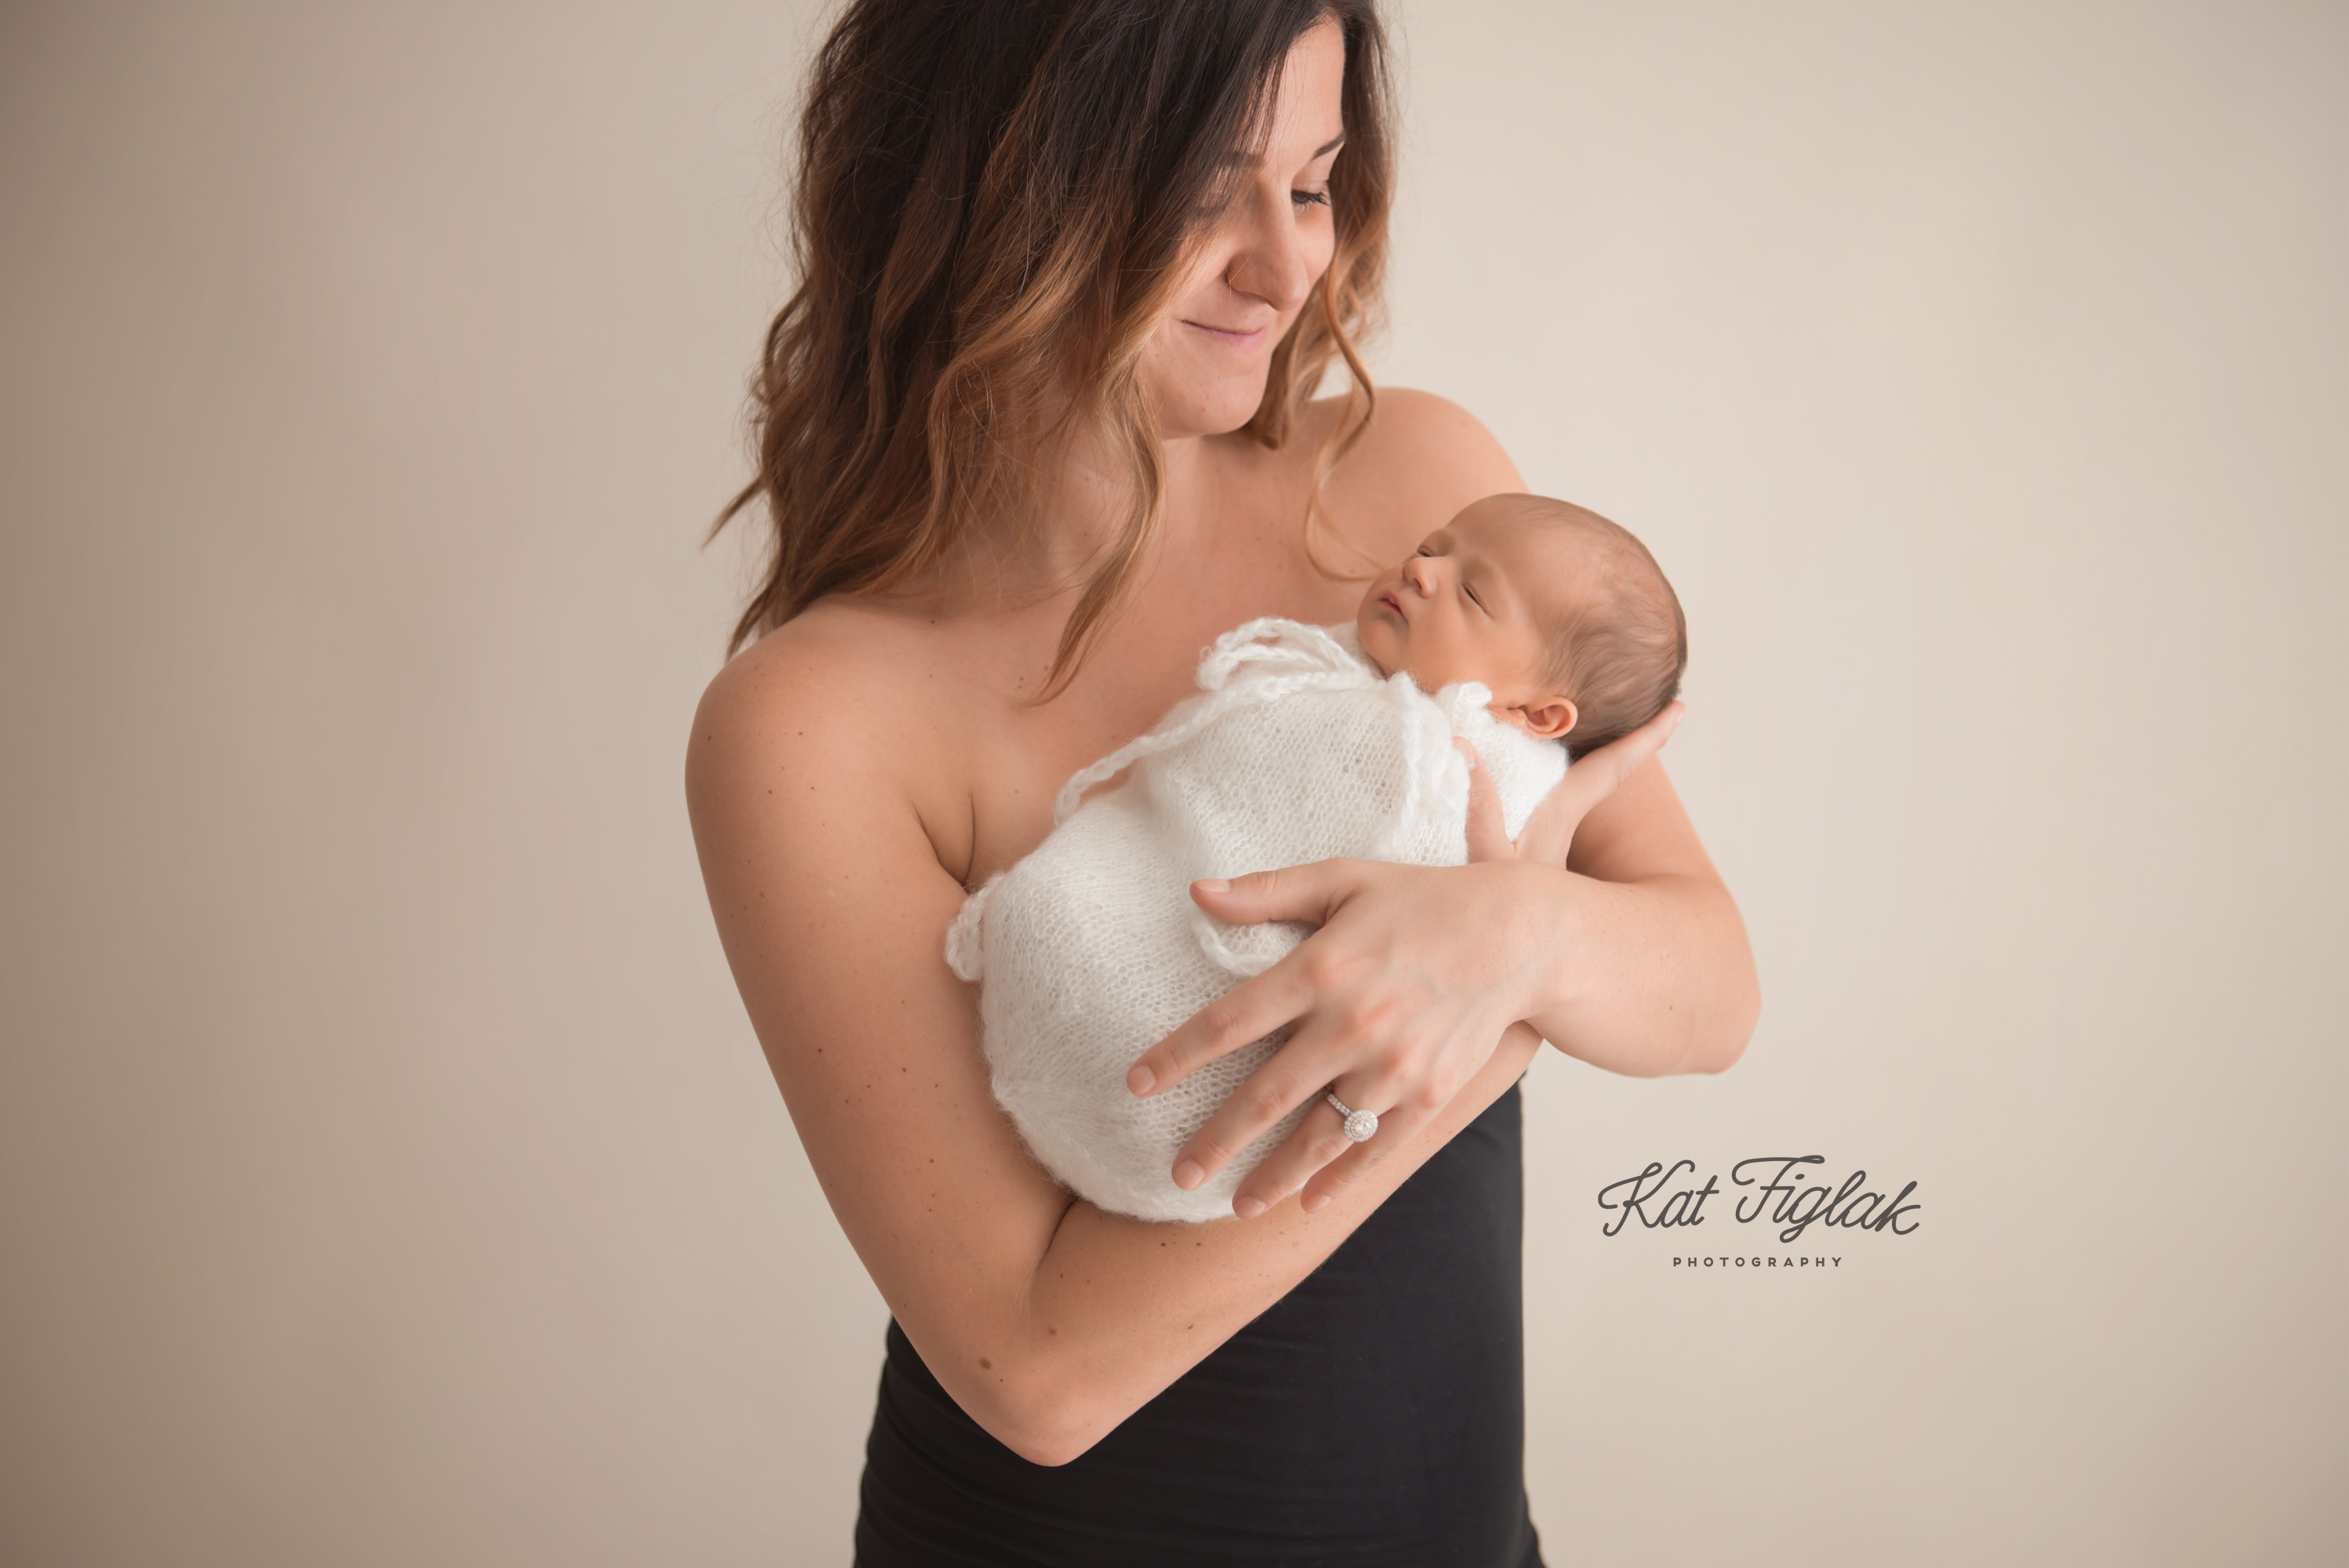 new mom holding her newborn baby girl wearing a black dress standing by a 